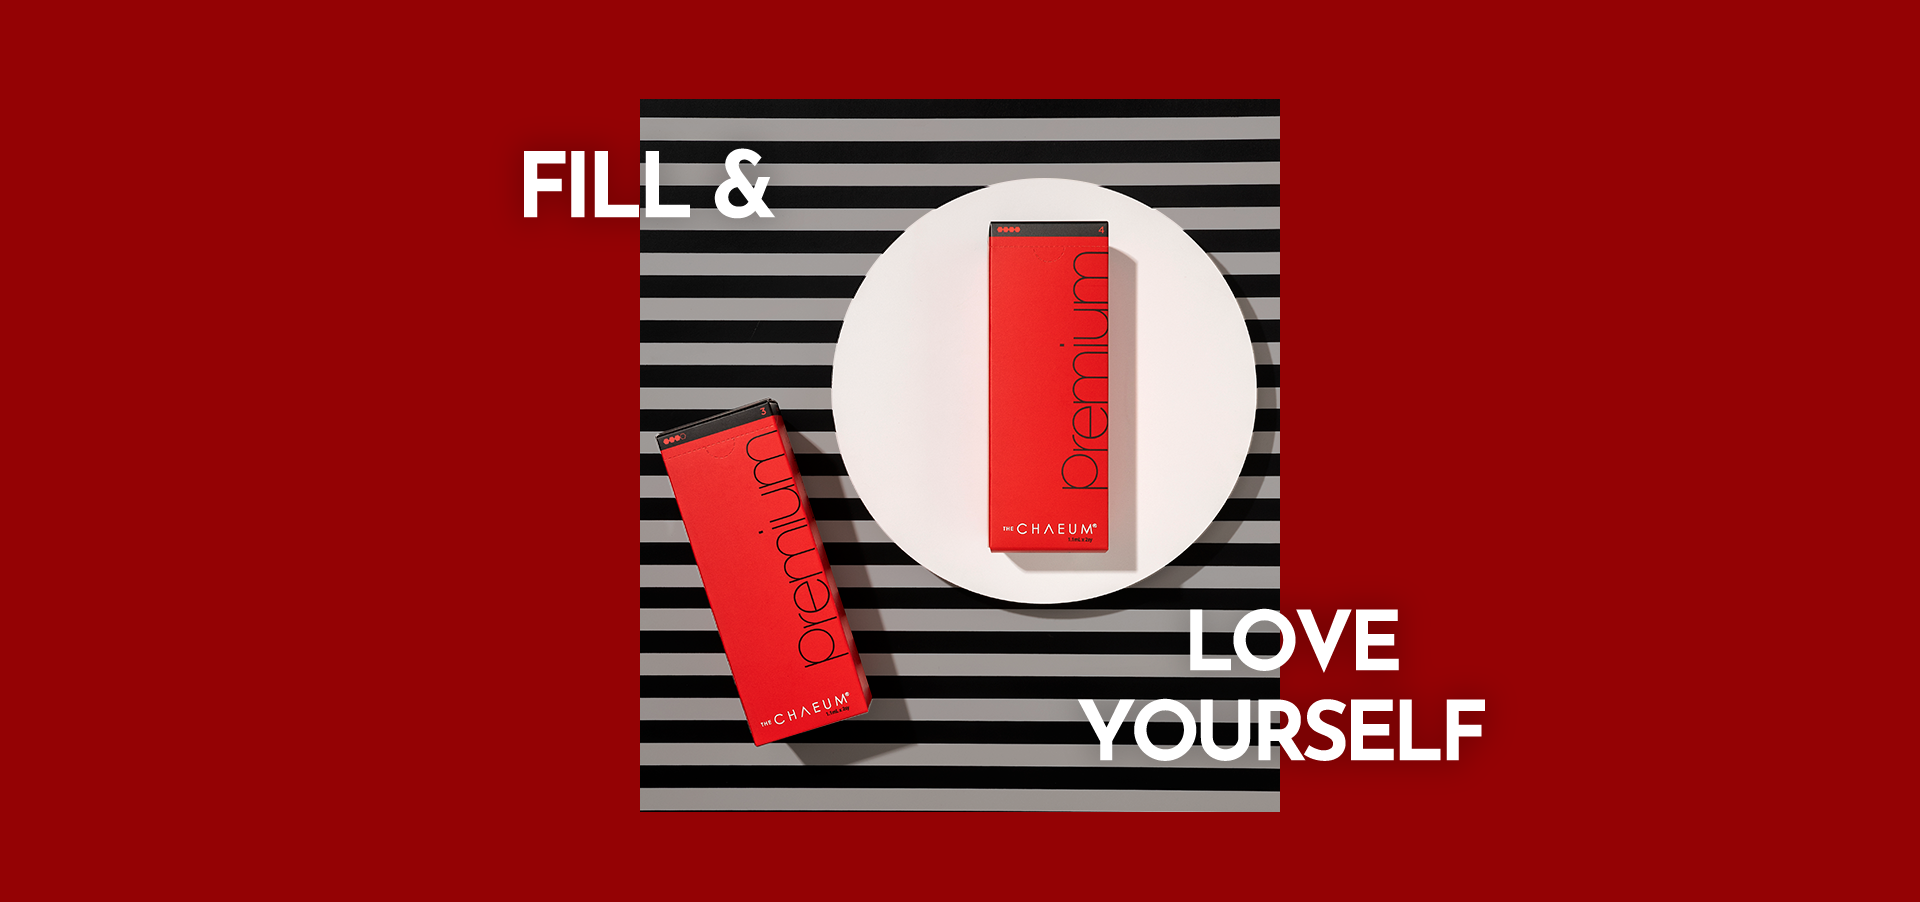 FILL & LOVE YOURSELF